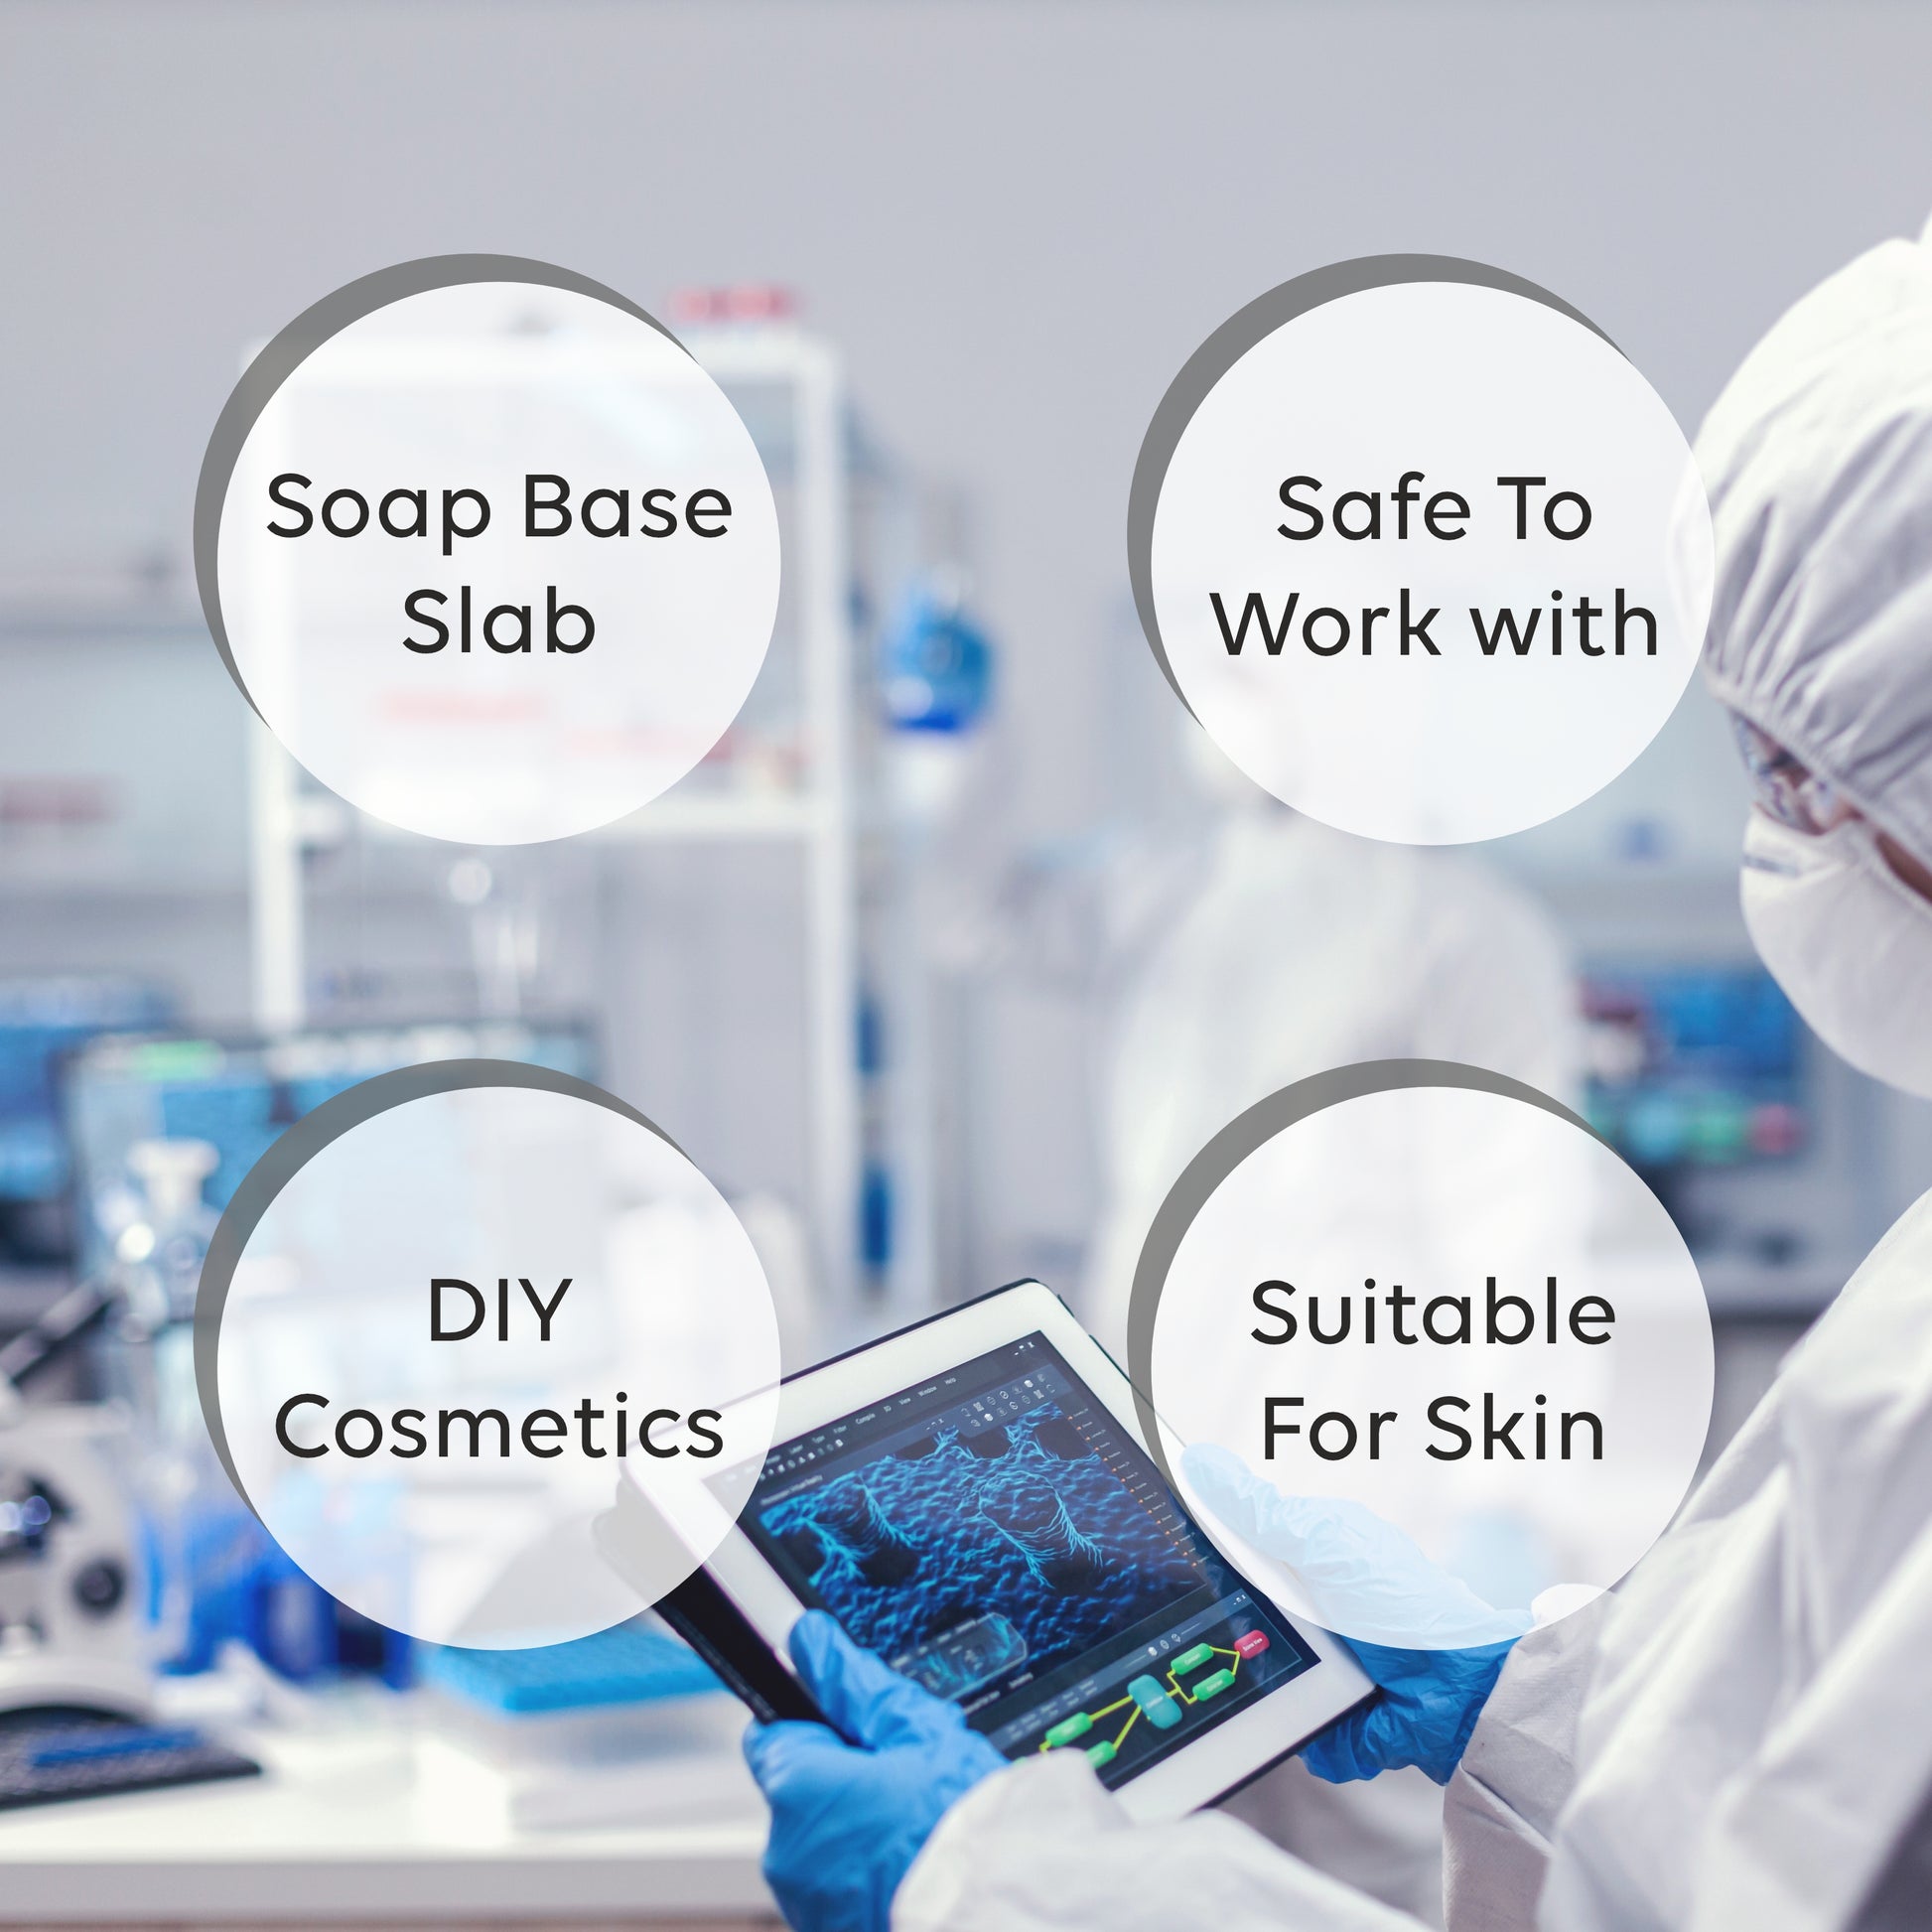 cosmeticmaking, saopmaking, cosmeticmakingingredients, soapmakingingredients,cosmeticingredients,naturalingredients,organicingredients,veganingredients, essentialoils,fragranceoils,carrieroils, carrieroils, butters, clays,botanicals,herbs,preservatives,emulsifiers,surfa ctants,thickeners, thickeners,exfoliants